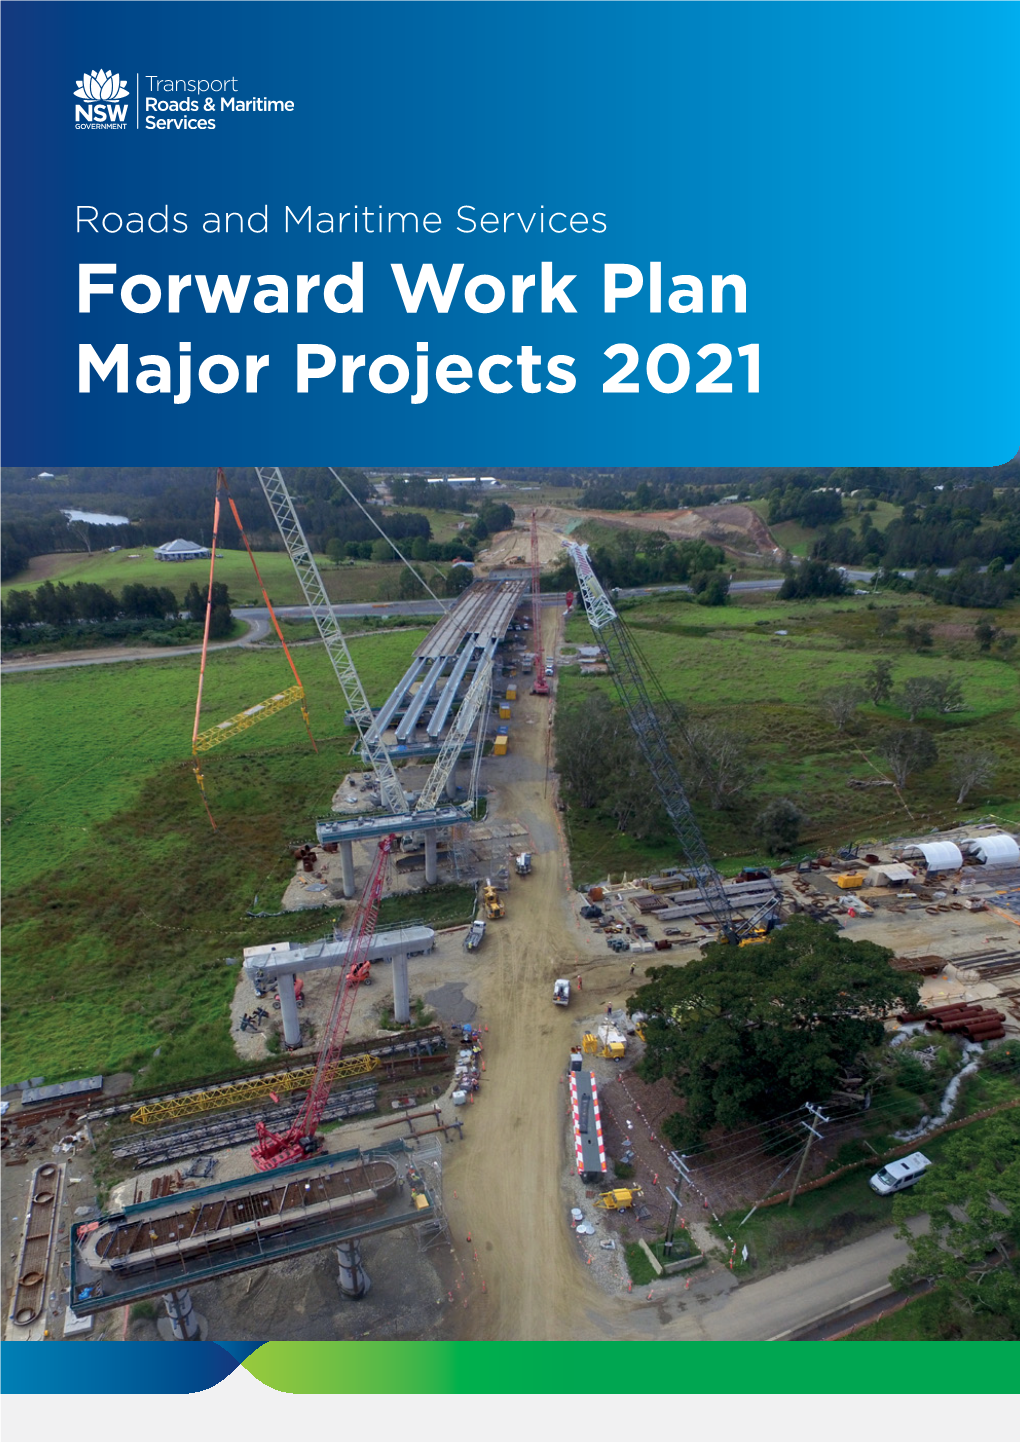 Forward Work Plan Major Projects 2021